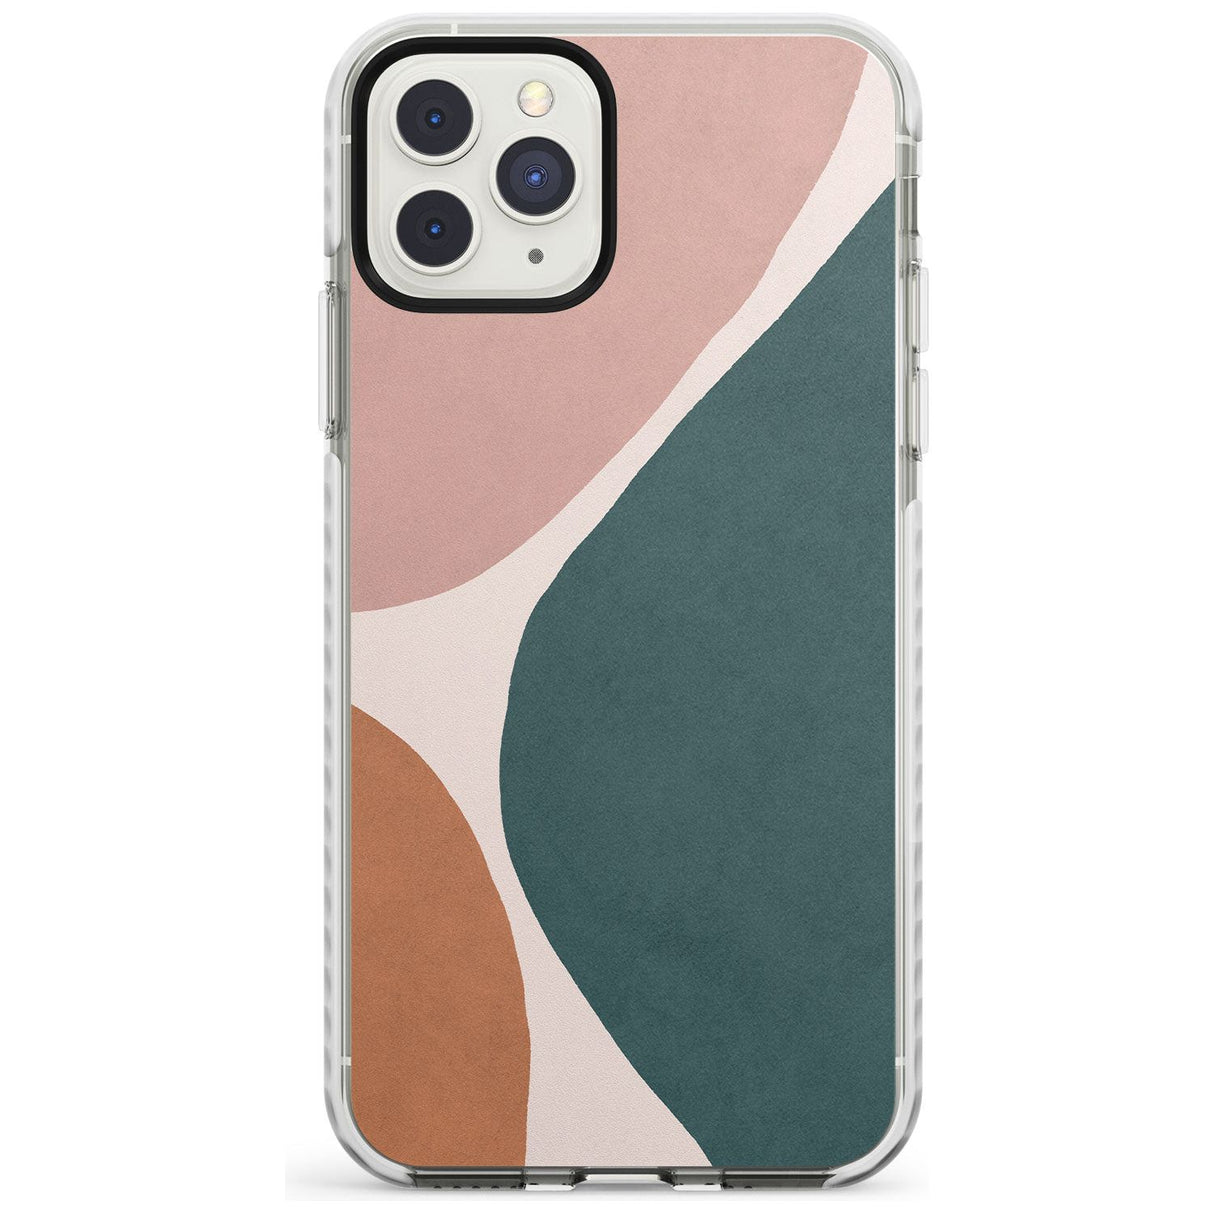 Lush Abstract Watercolour Design #8 Phone Case iPhone 11 Pro Max / Impact Case,iPhone 11 Pro / Impact Case,iPhone 12 Pro / Impact Case,iPhone 12 Pro Max / Impact Case Blanc Space